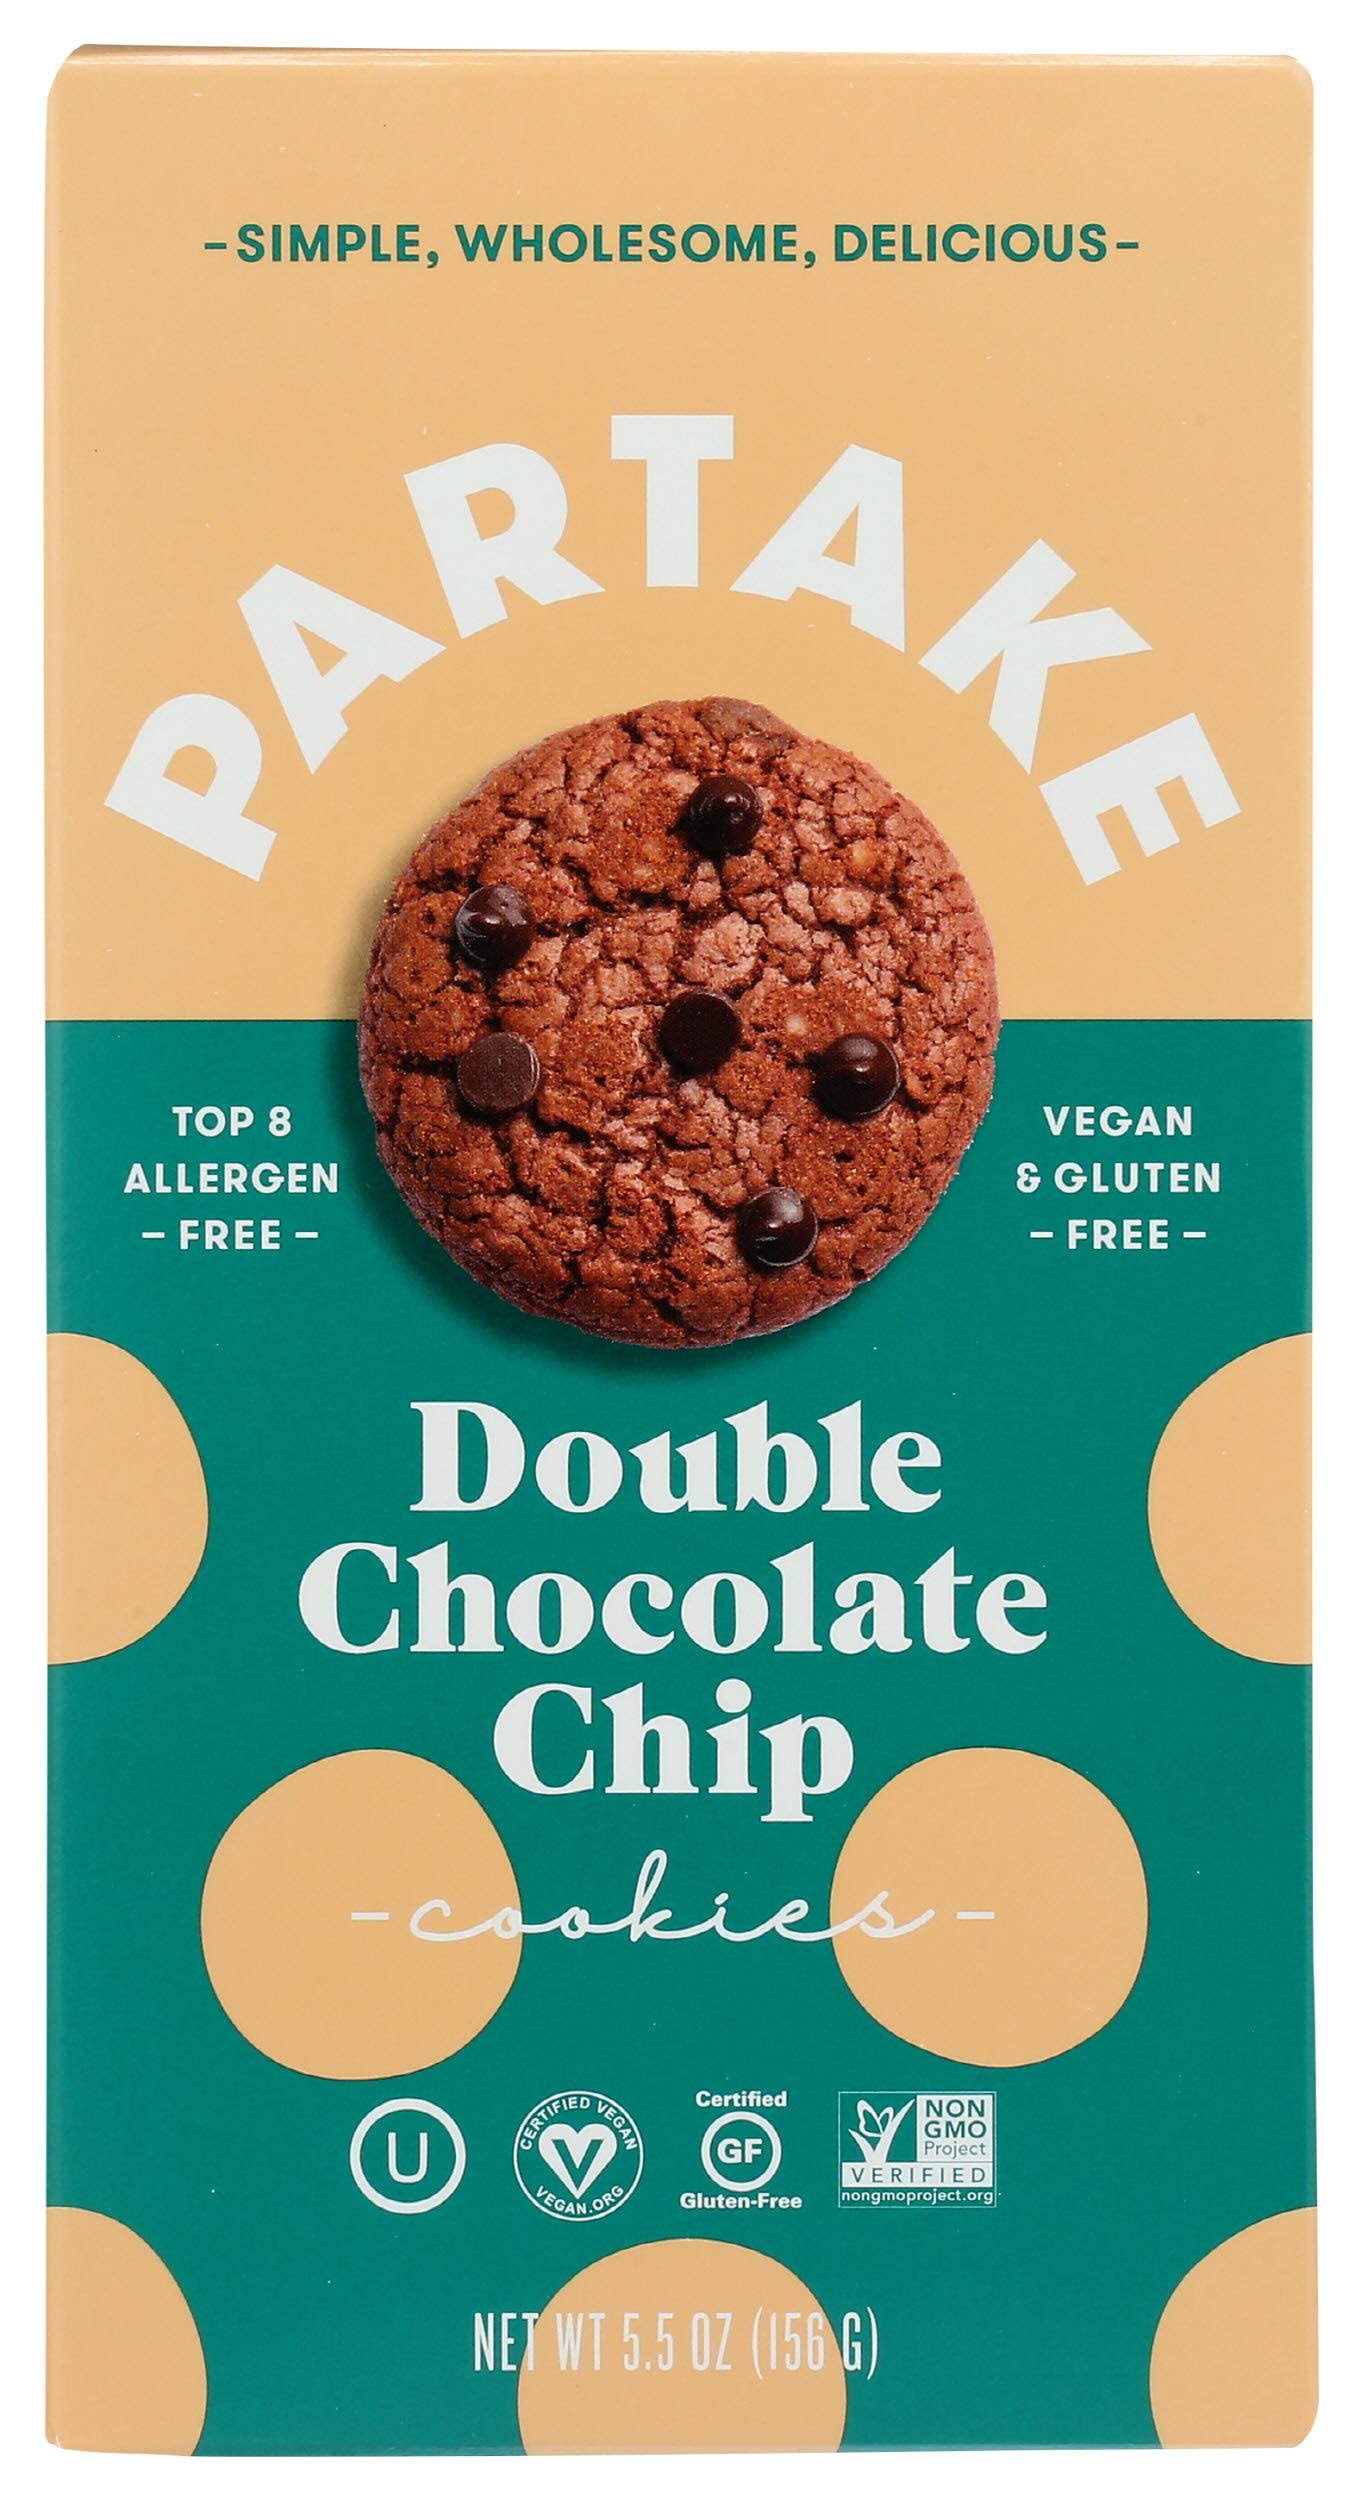 Partake, Crunchy Cookies, Double Chocolate, 5.5 oz (156 g)